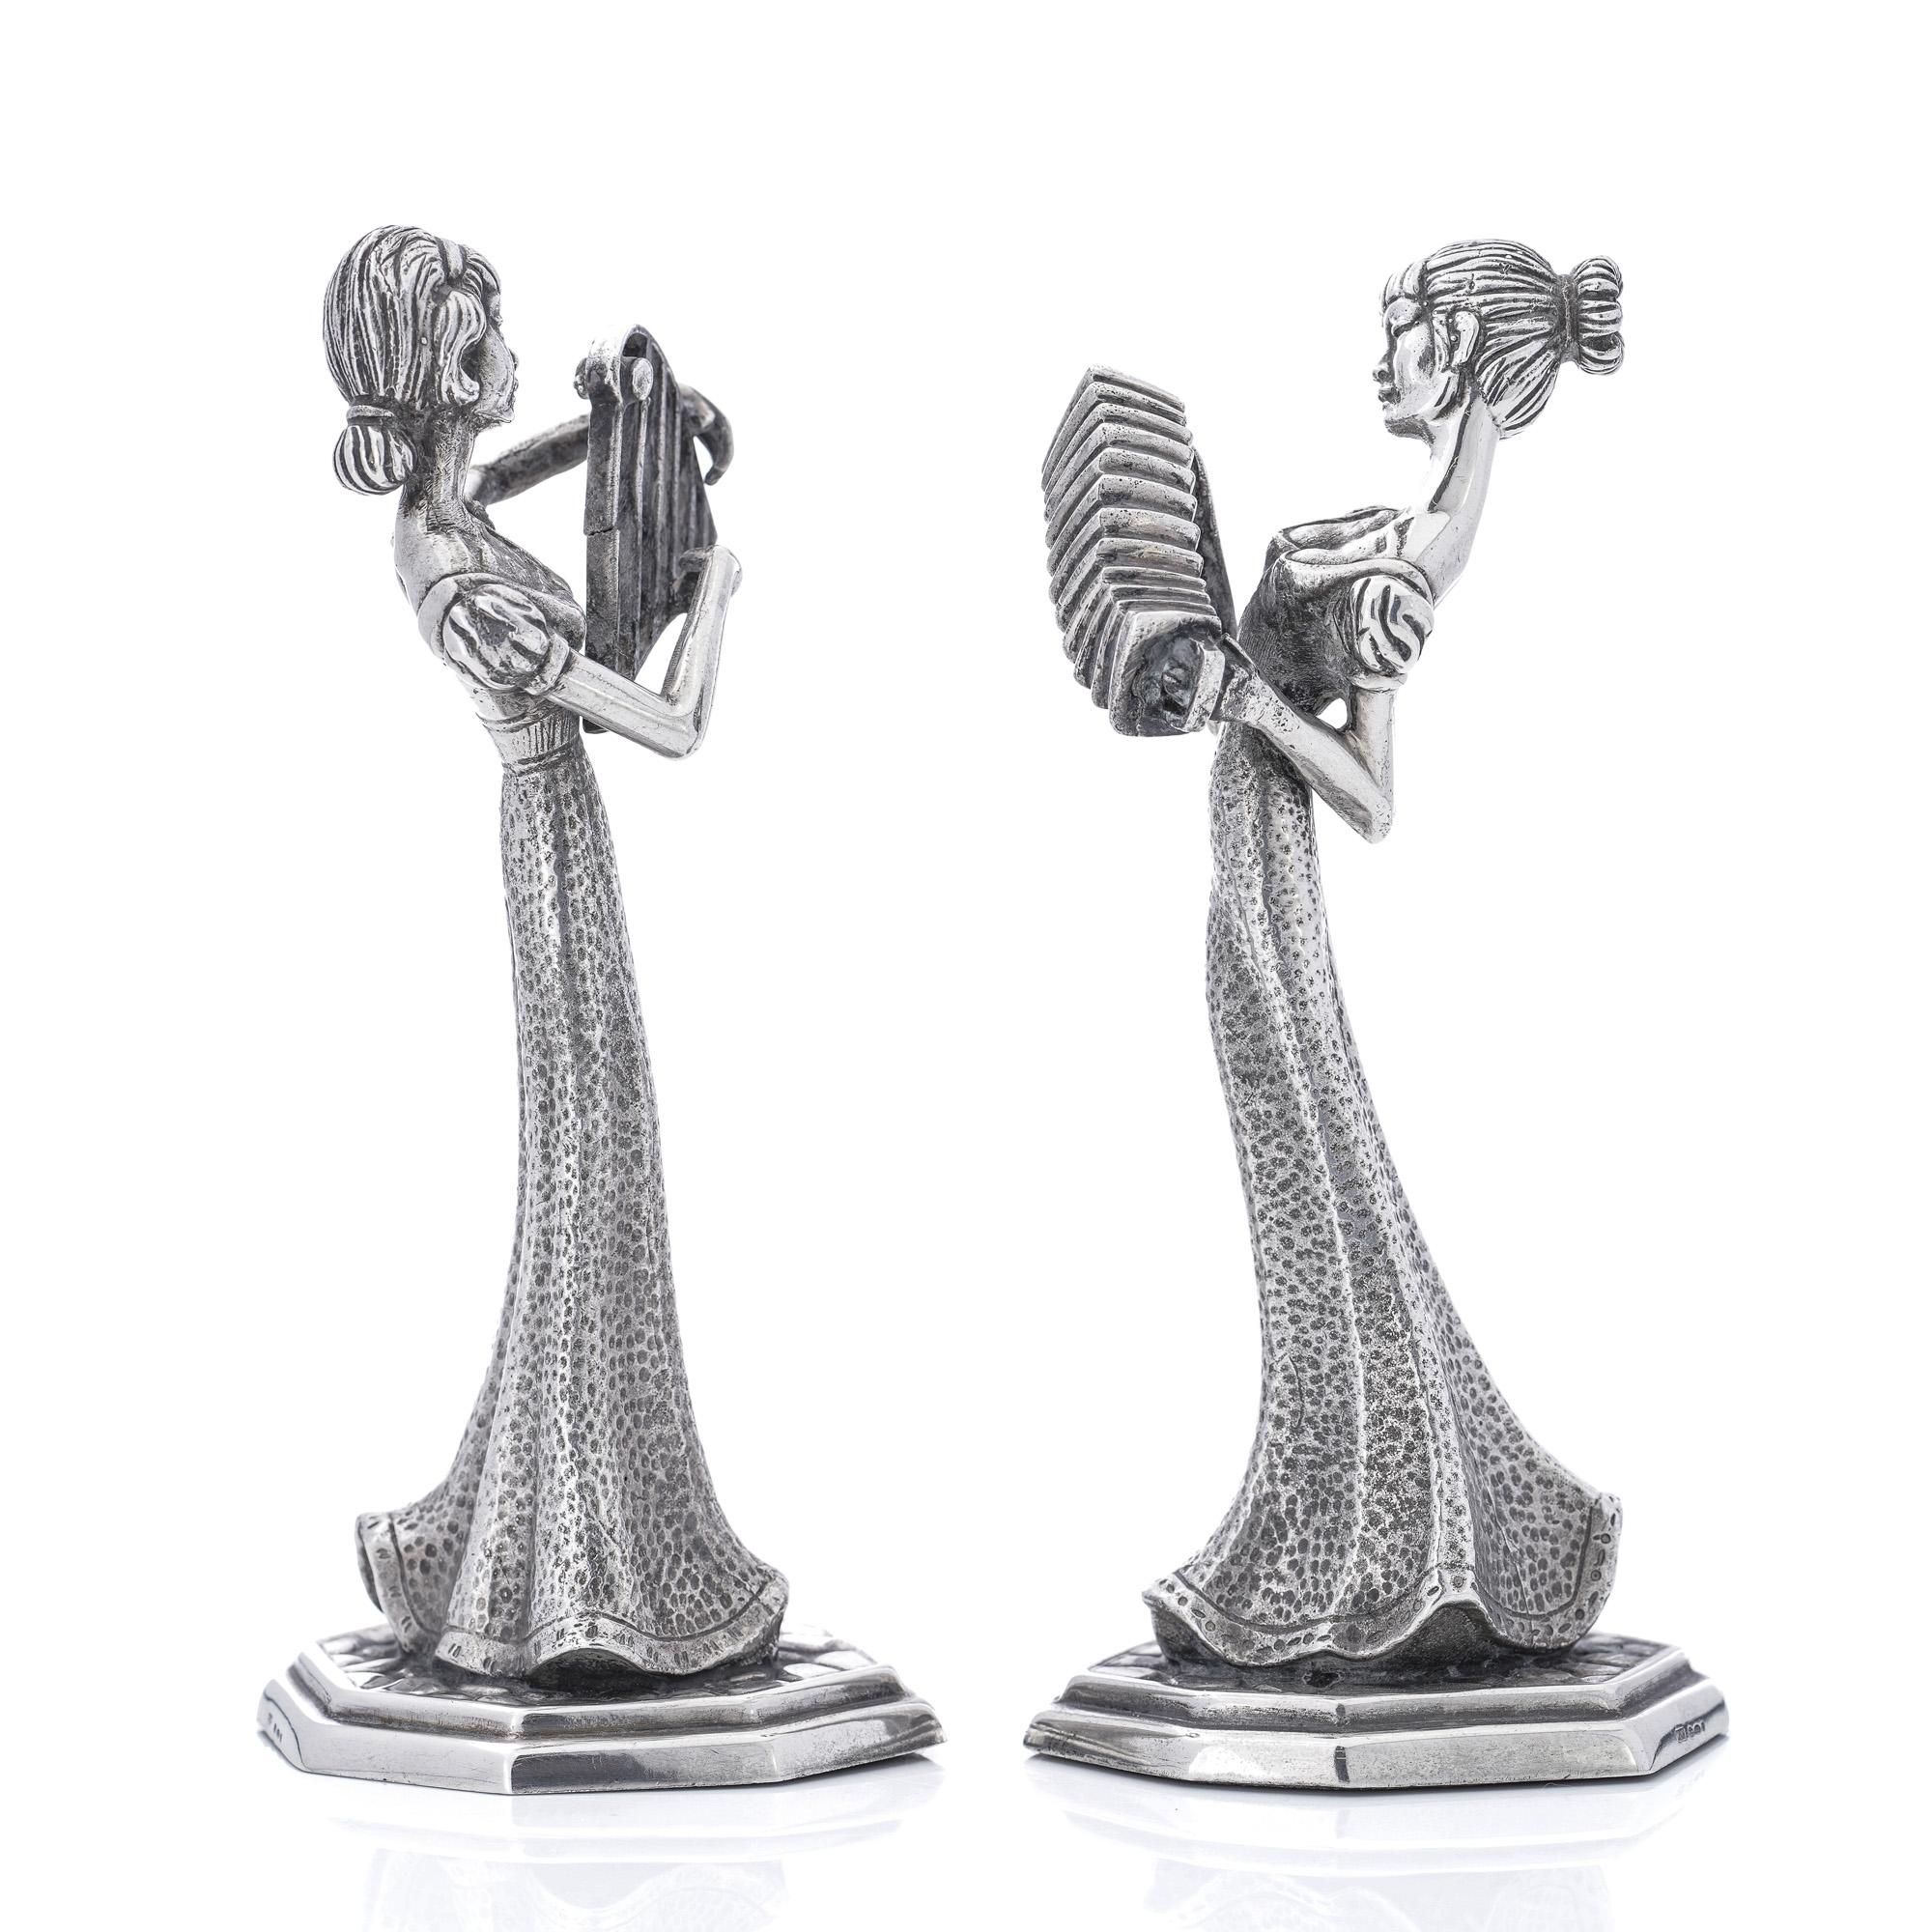 Vintage sterling silver pair of lady figurines by Mappin & Webb 
Made in England, 1973
Maker: Mappin & Webb 
Fully Hallmarked. 

Approx. Dimensions - 
Length x Width x height: 6.4 x 4.9 x 13.5 cm 
Weight: 365 grams in total. 

 Condition: